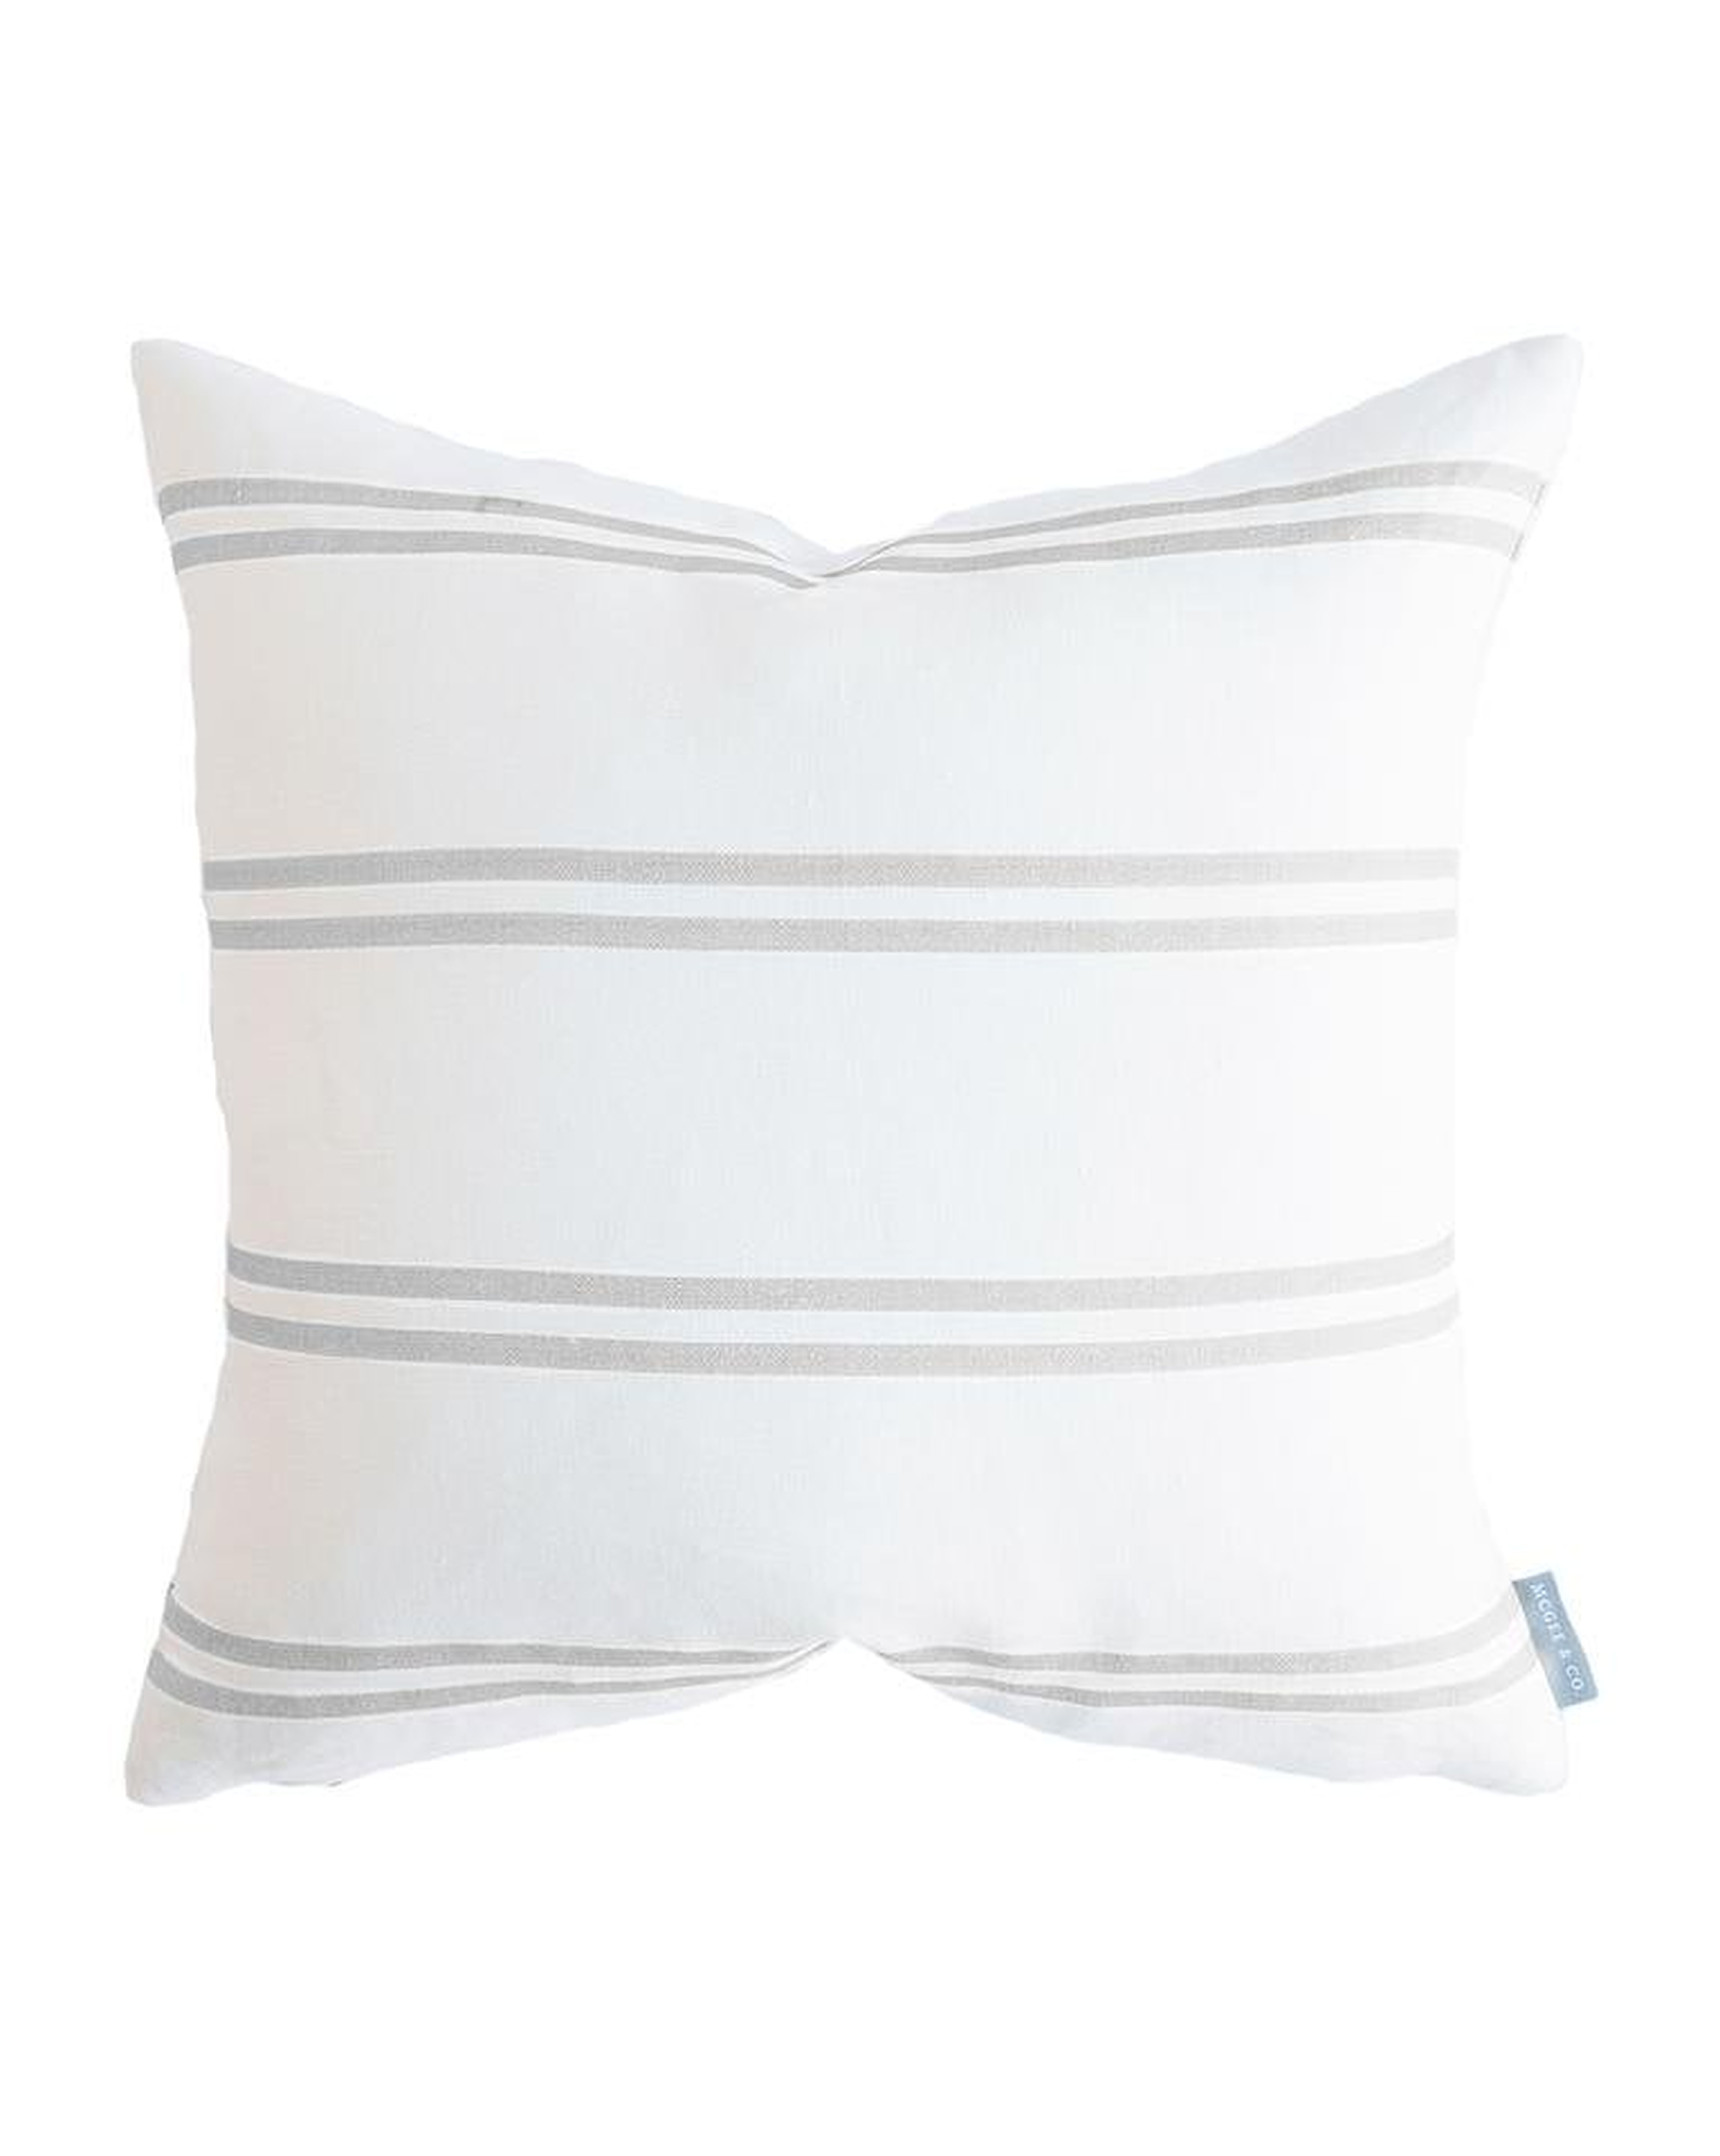 FRANKLIN GRAY STRIPE PILLOW WITHOUT INSERT, 22" x 22" - McGee & Co.